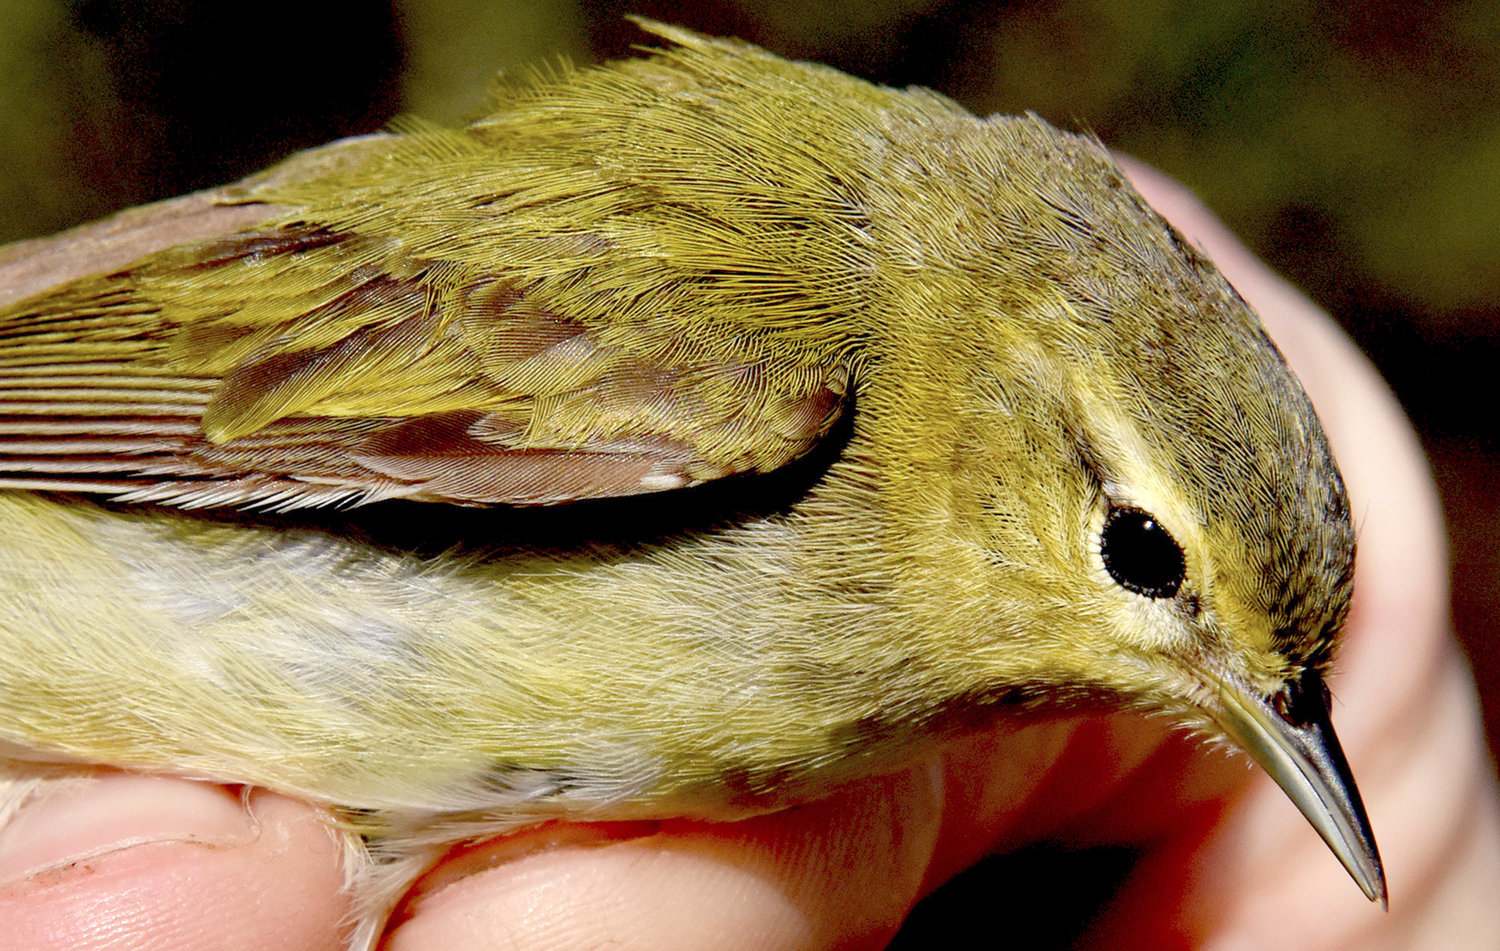 Luke DeGroote holds a Tennessee warbler for a closeup after getting caught in a long net at the Powdermill Avian Research center in May 2018, near Rector, Pa. The Tennessee warbler is one of some 450 bird species discussed in a new online atlas of bird migration.